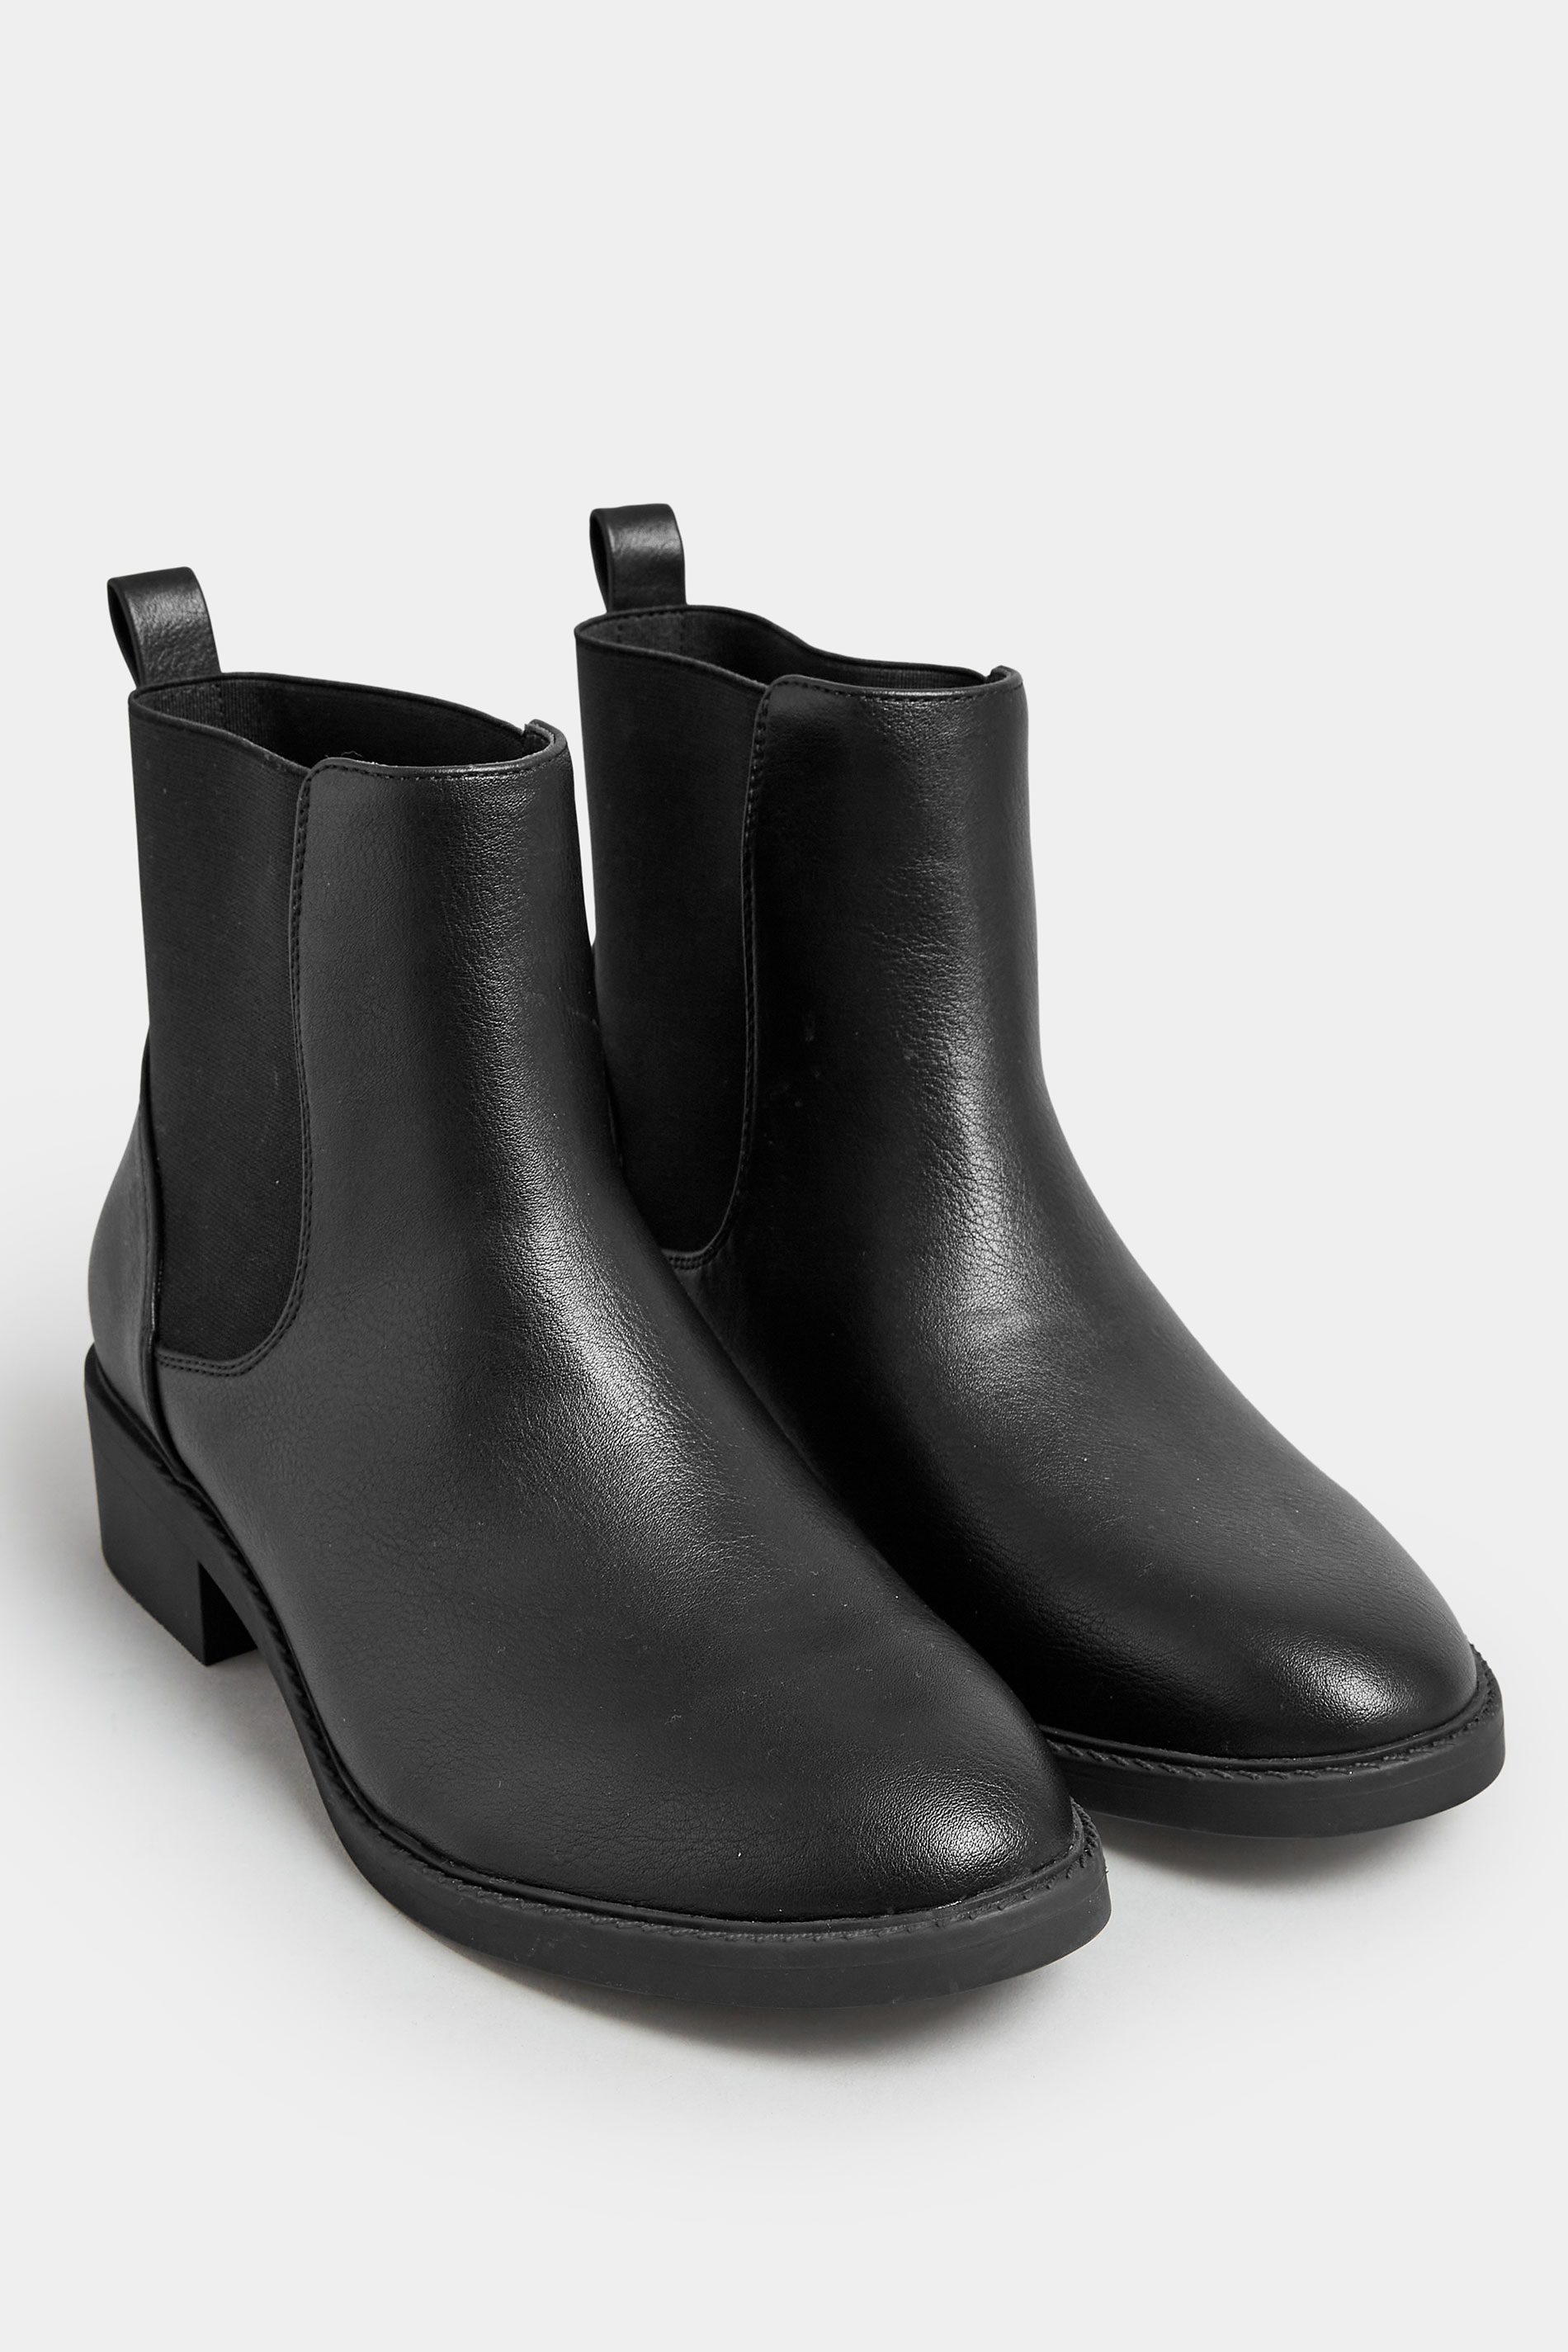 Black Faux Leather Elasticated Chelsea Boots In Wide E Fit & Extra Wide EEE Fit | Yours Clothing 2